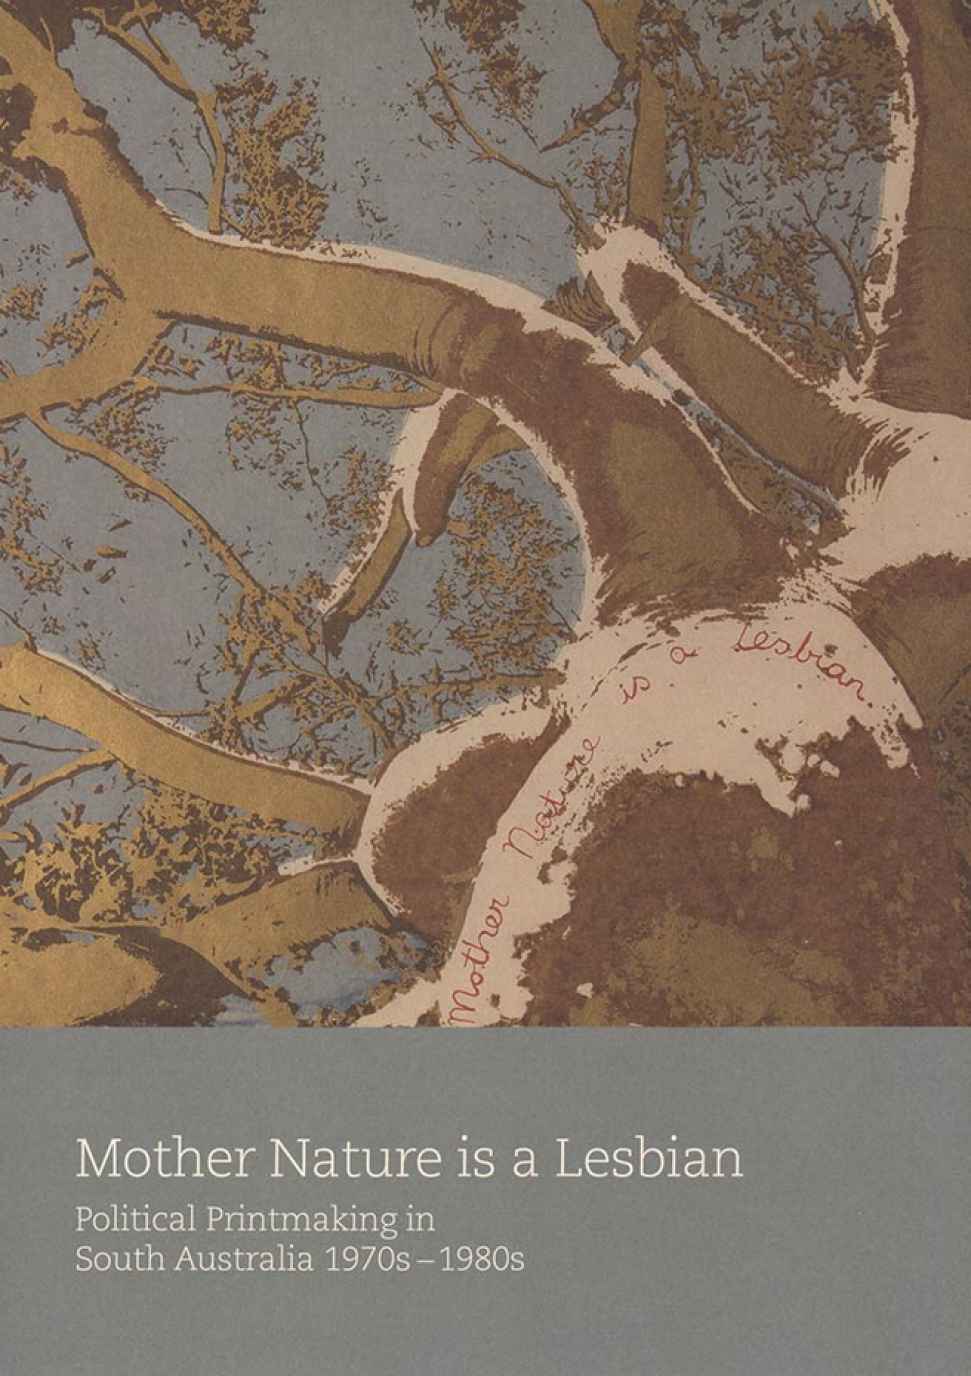 mother-nature-is-a-lesbian-publication-thumb.jpg